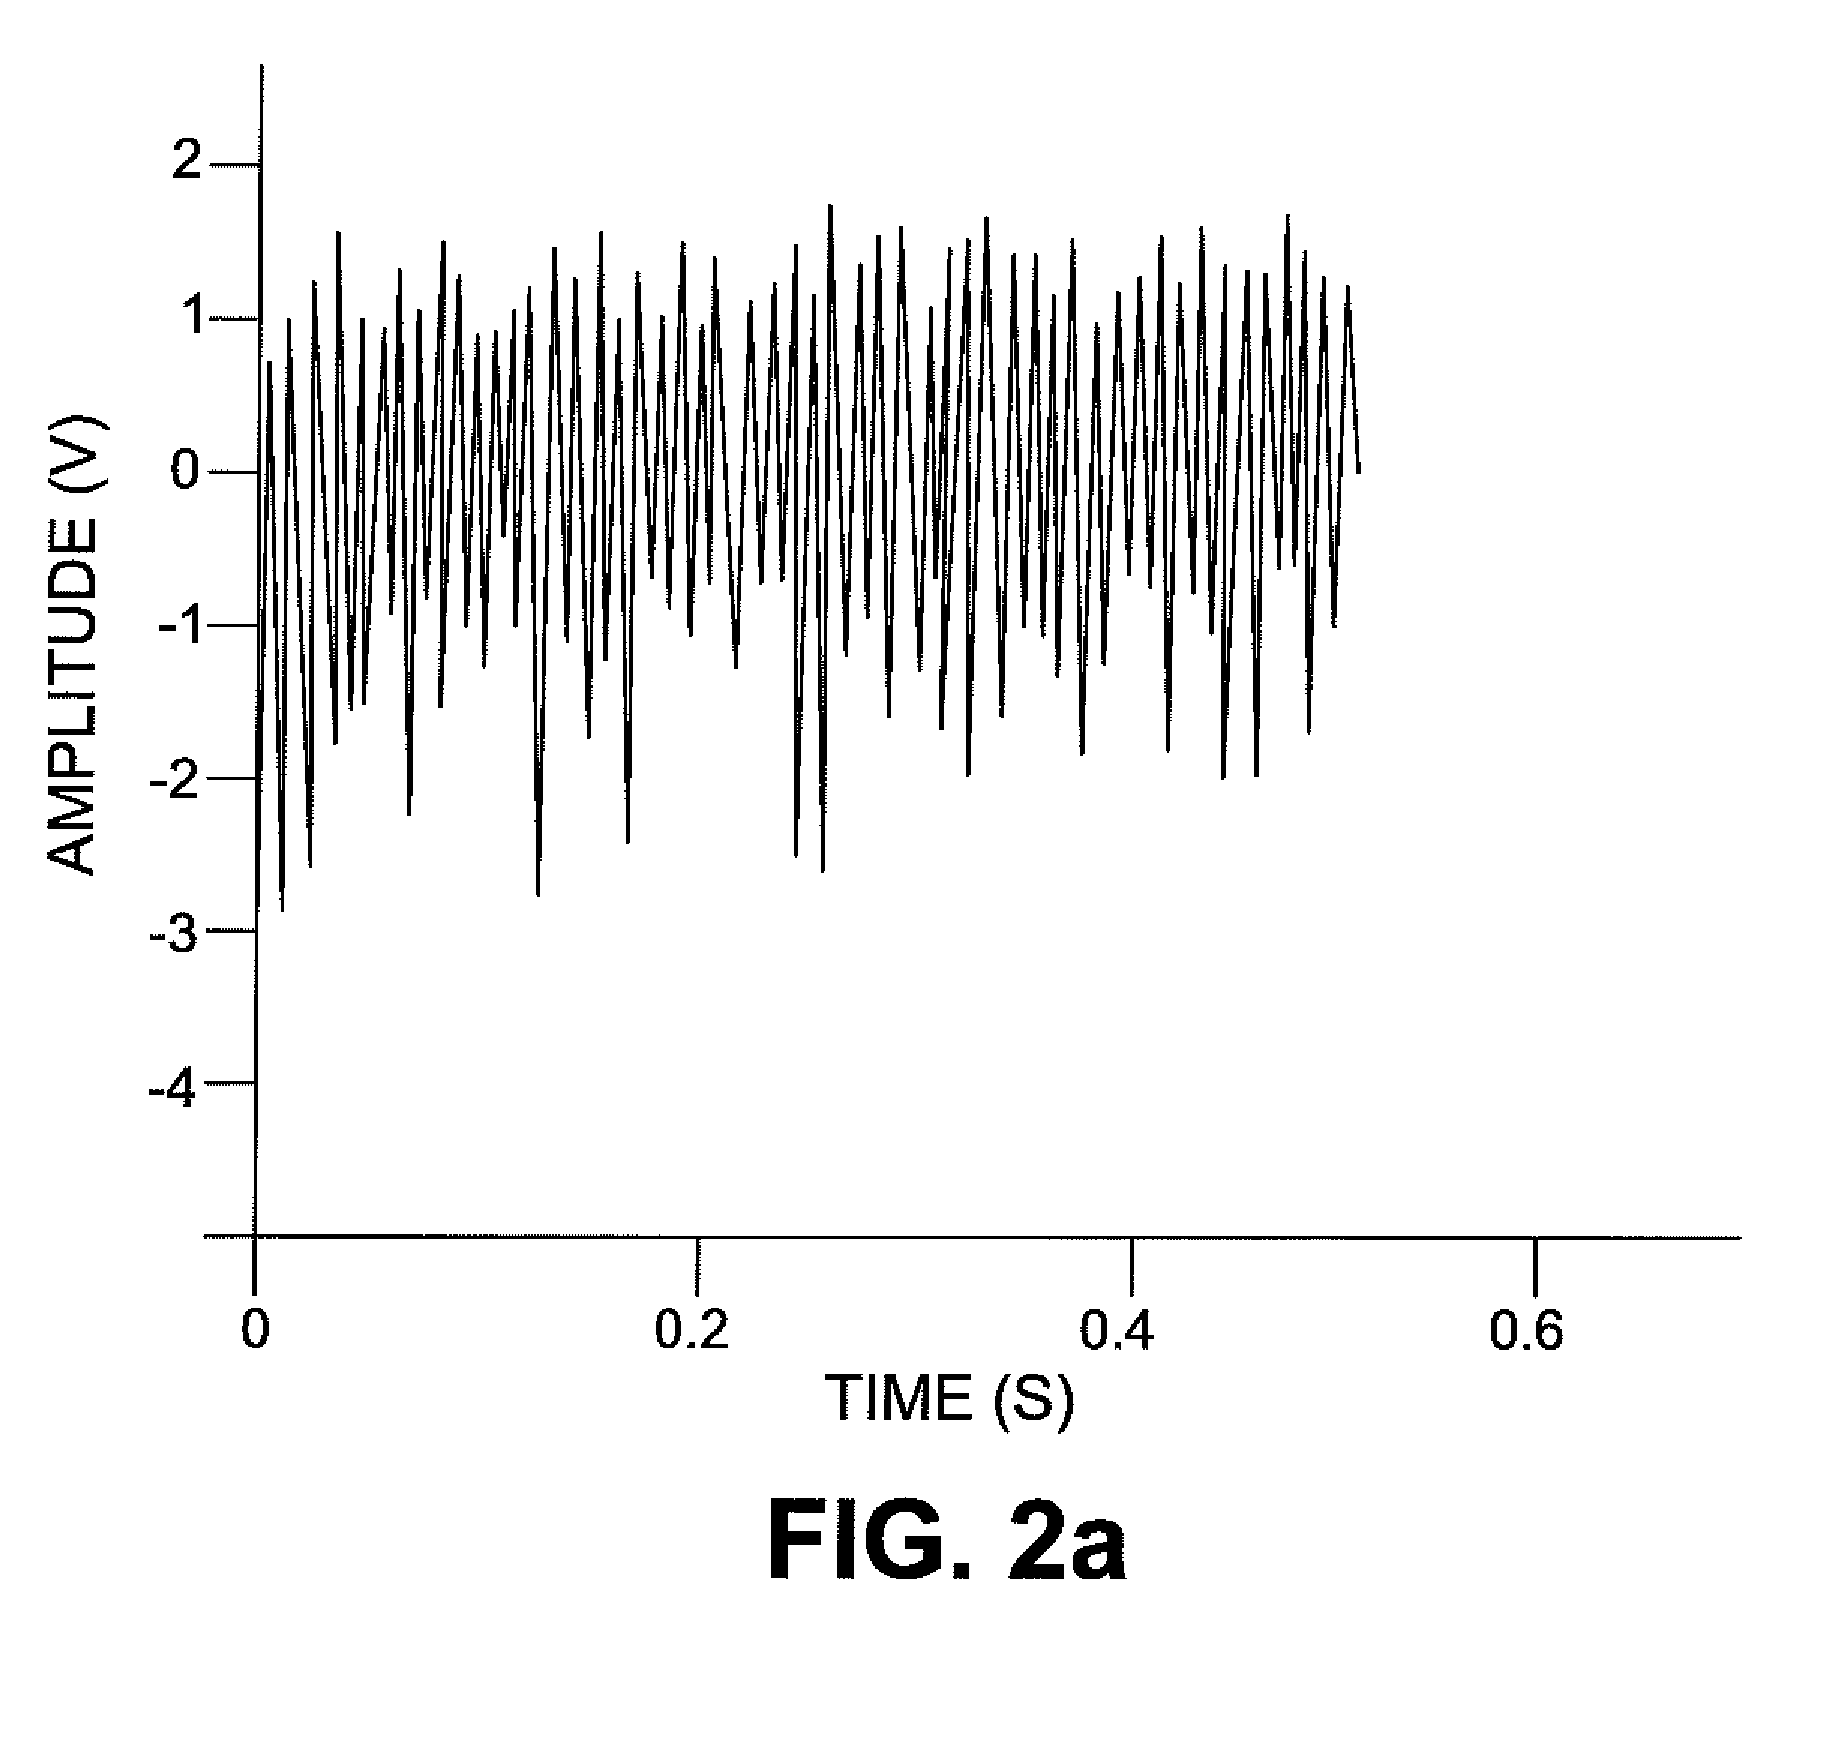 Generation of an Analog Gaussian Noise Signal Having Predetermined Characteristics